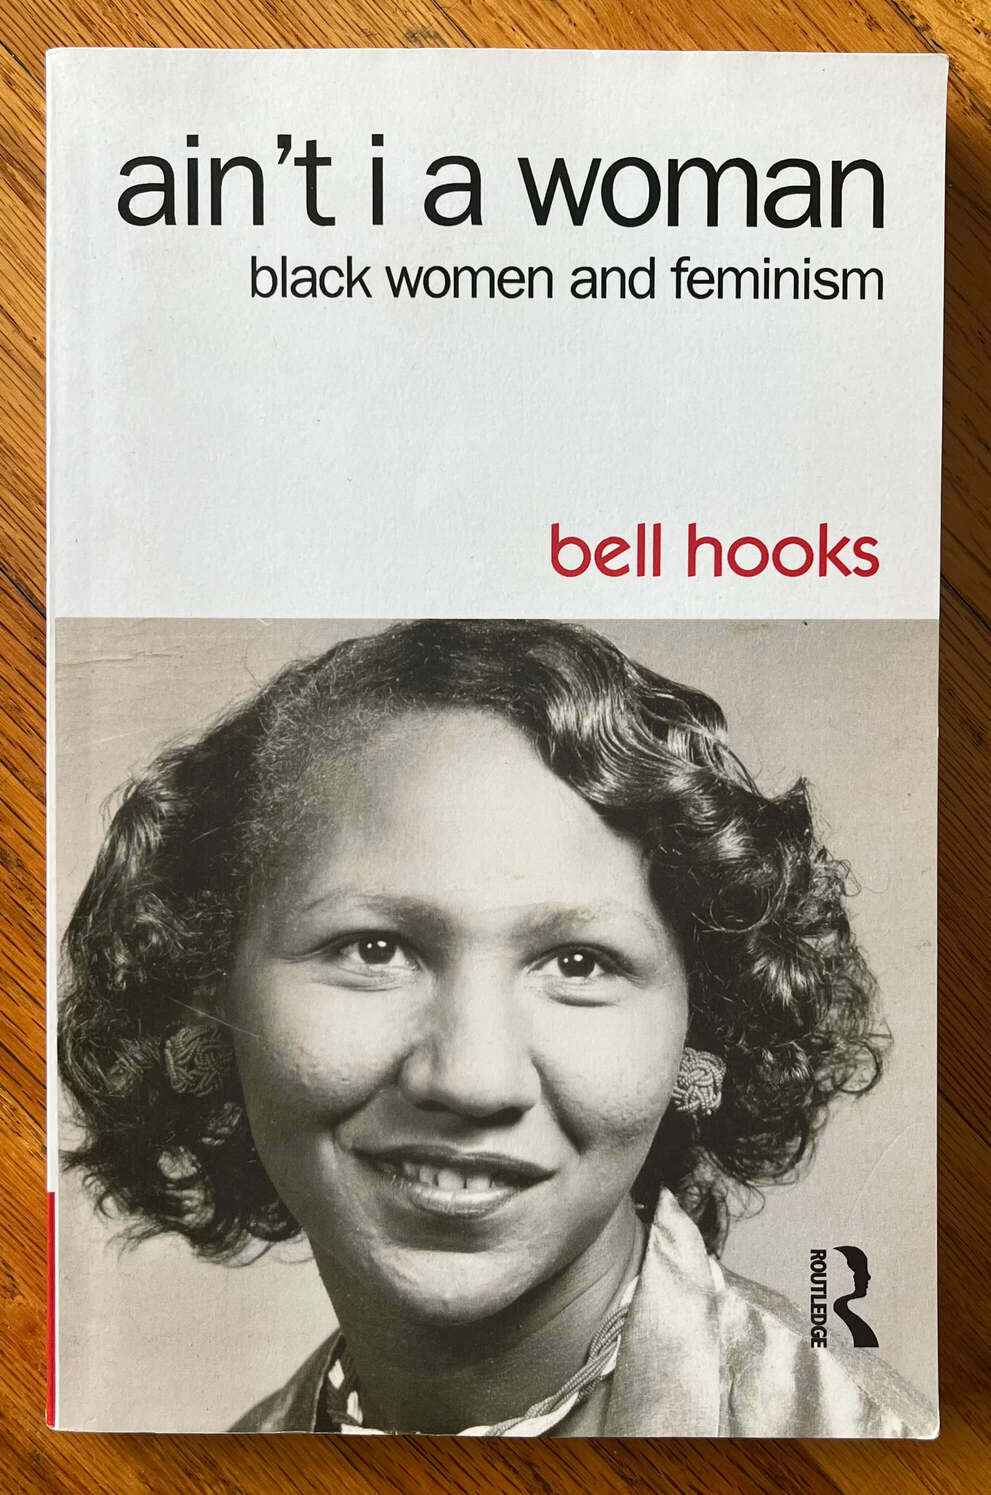 “ain't i a woman: black women and feminism” by bell hooks.